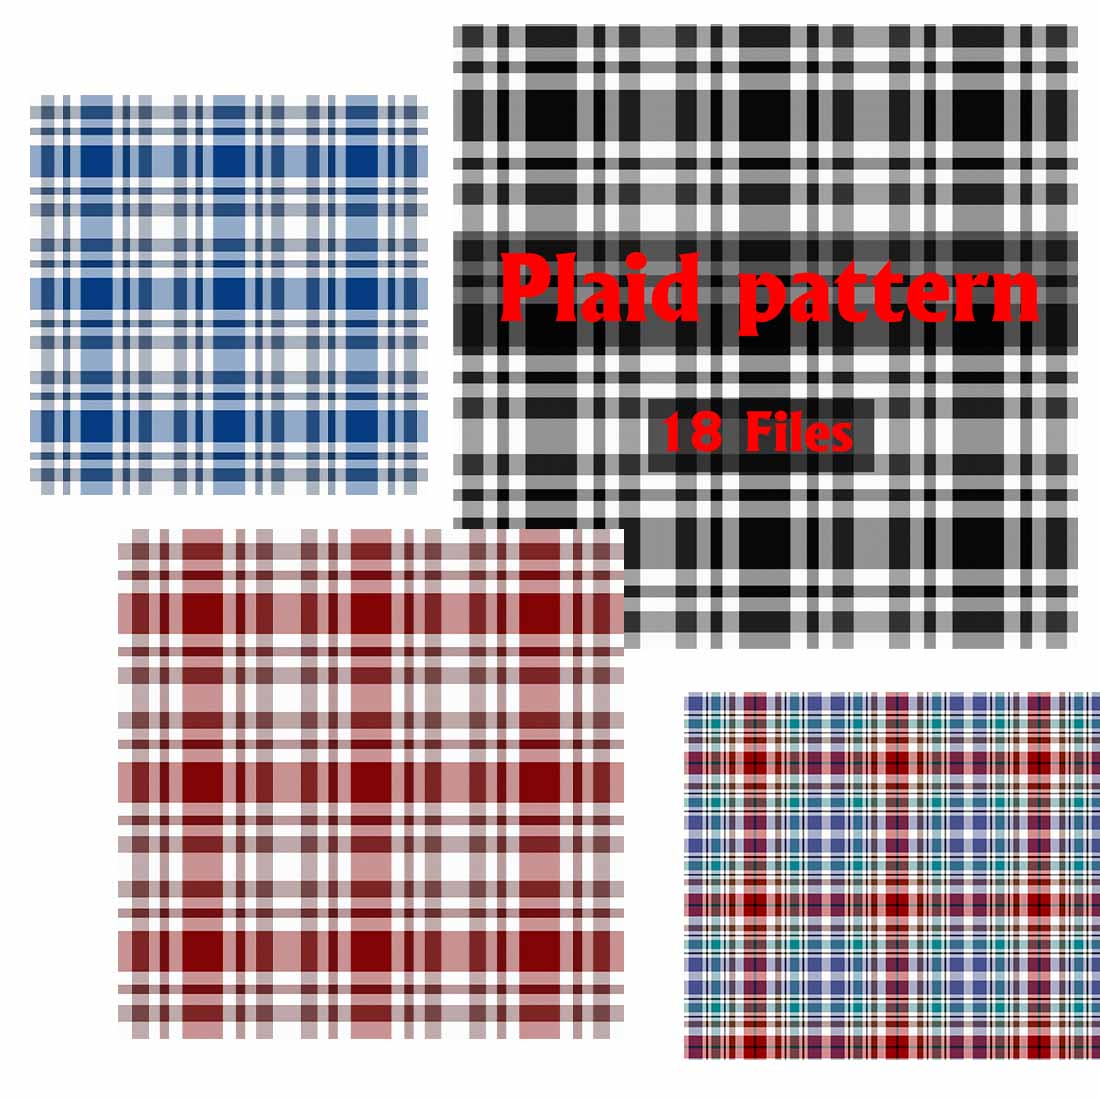 Plaid pattern Flannel fabric texture preview image.